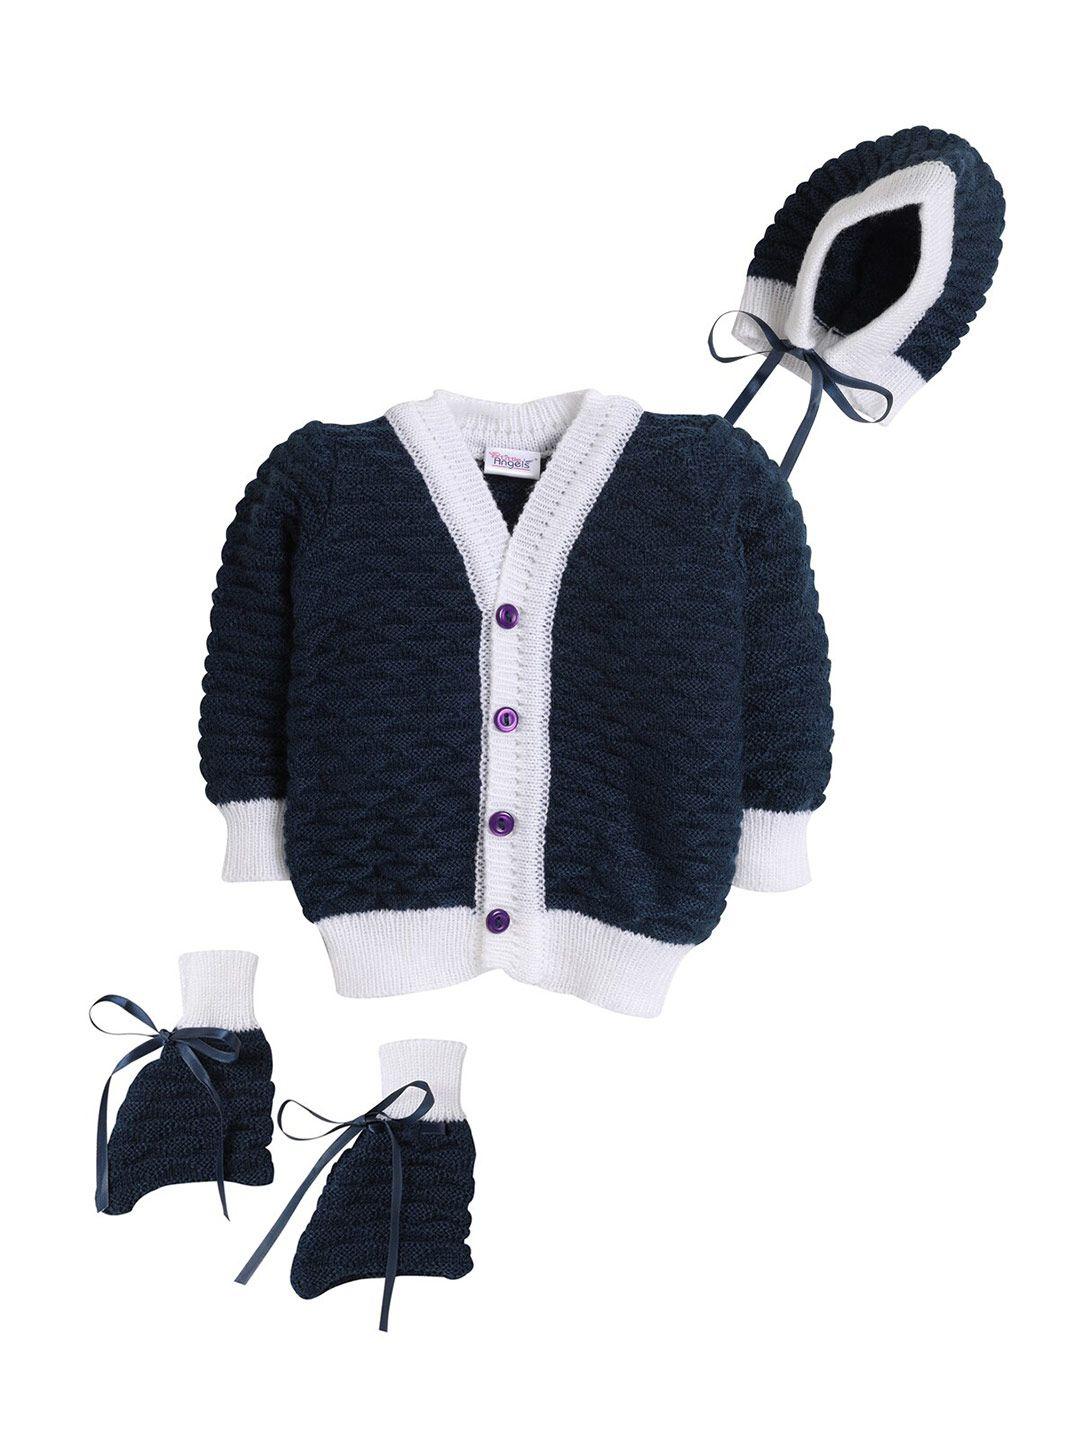 little-angels-unisex-kids-navy-blue-&-off-white-colourblocked-cardigan-with-cap-and-socks